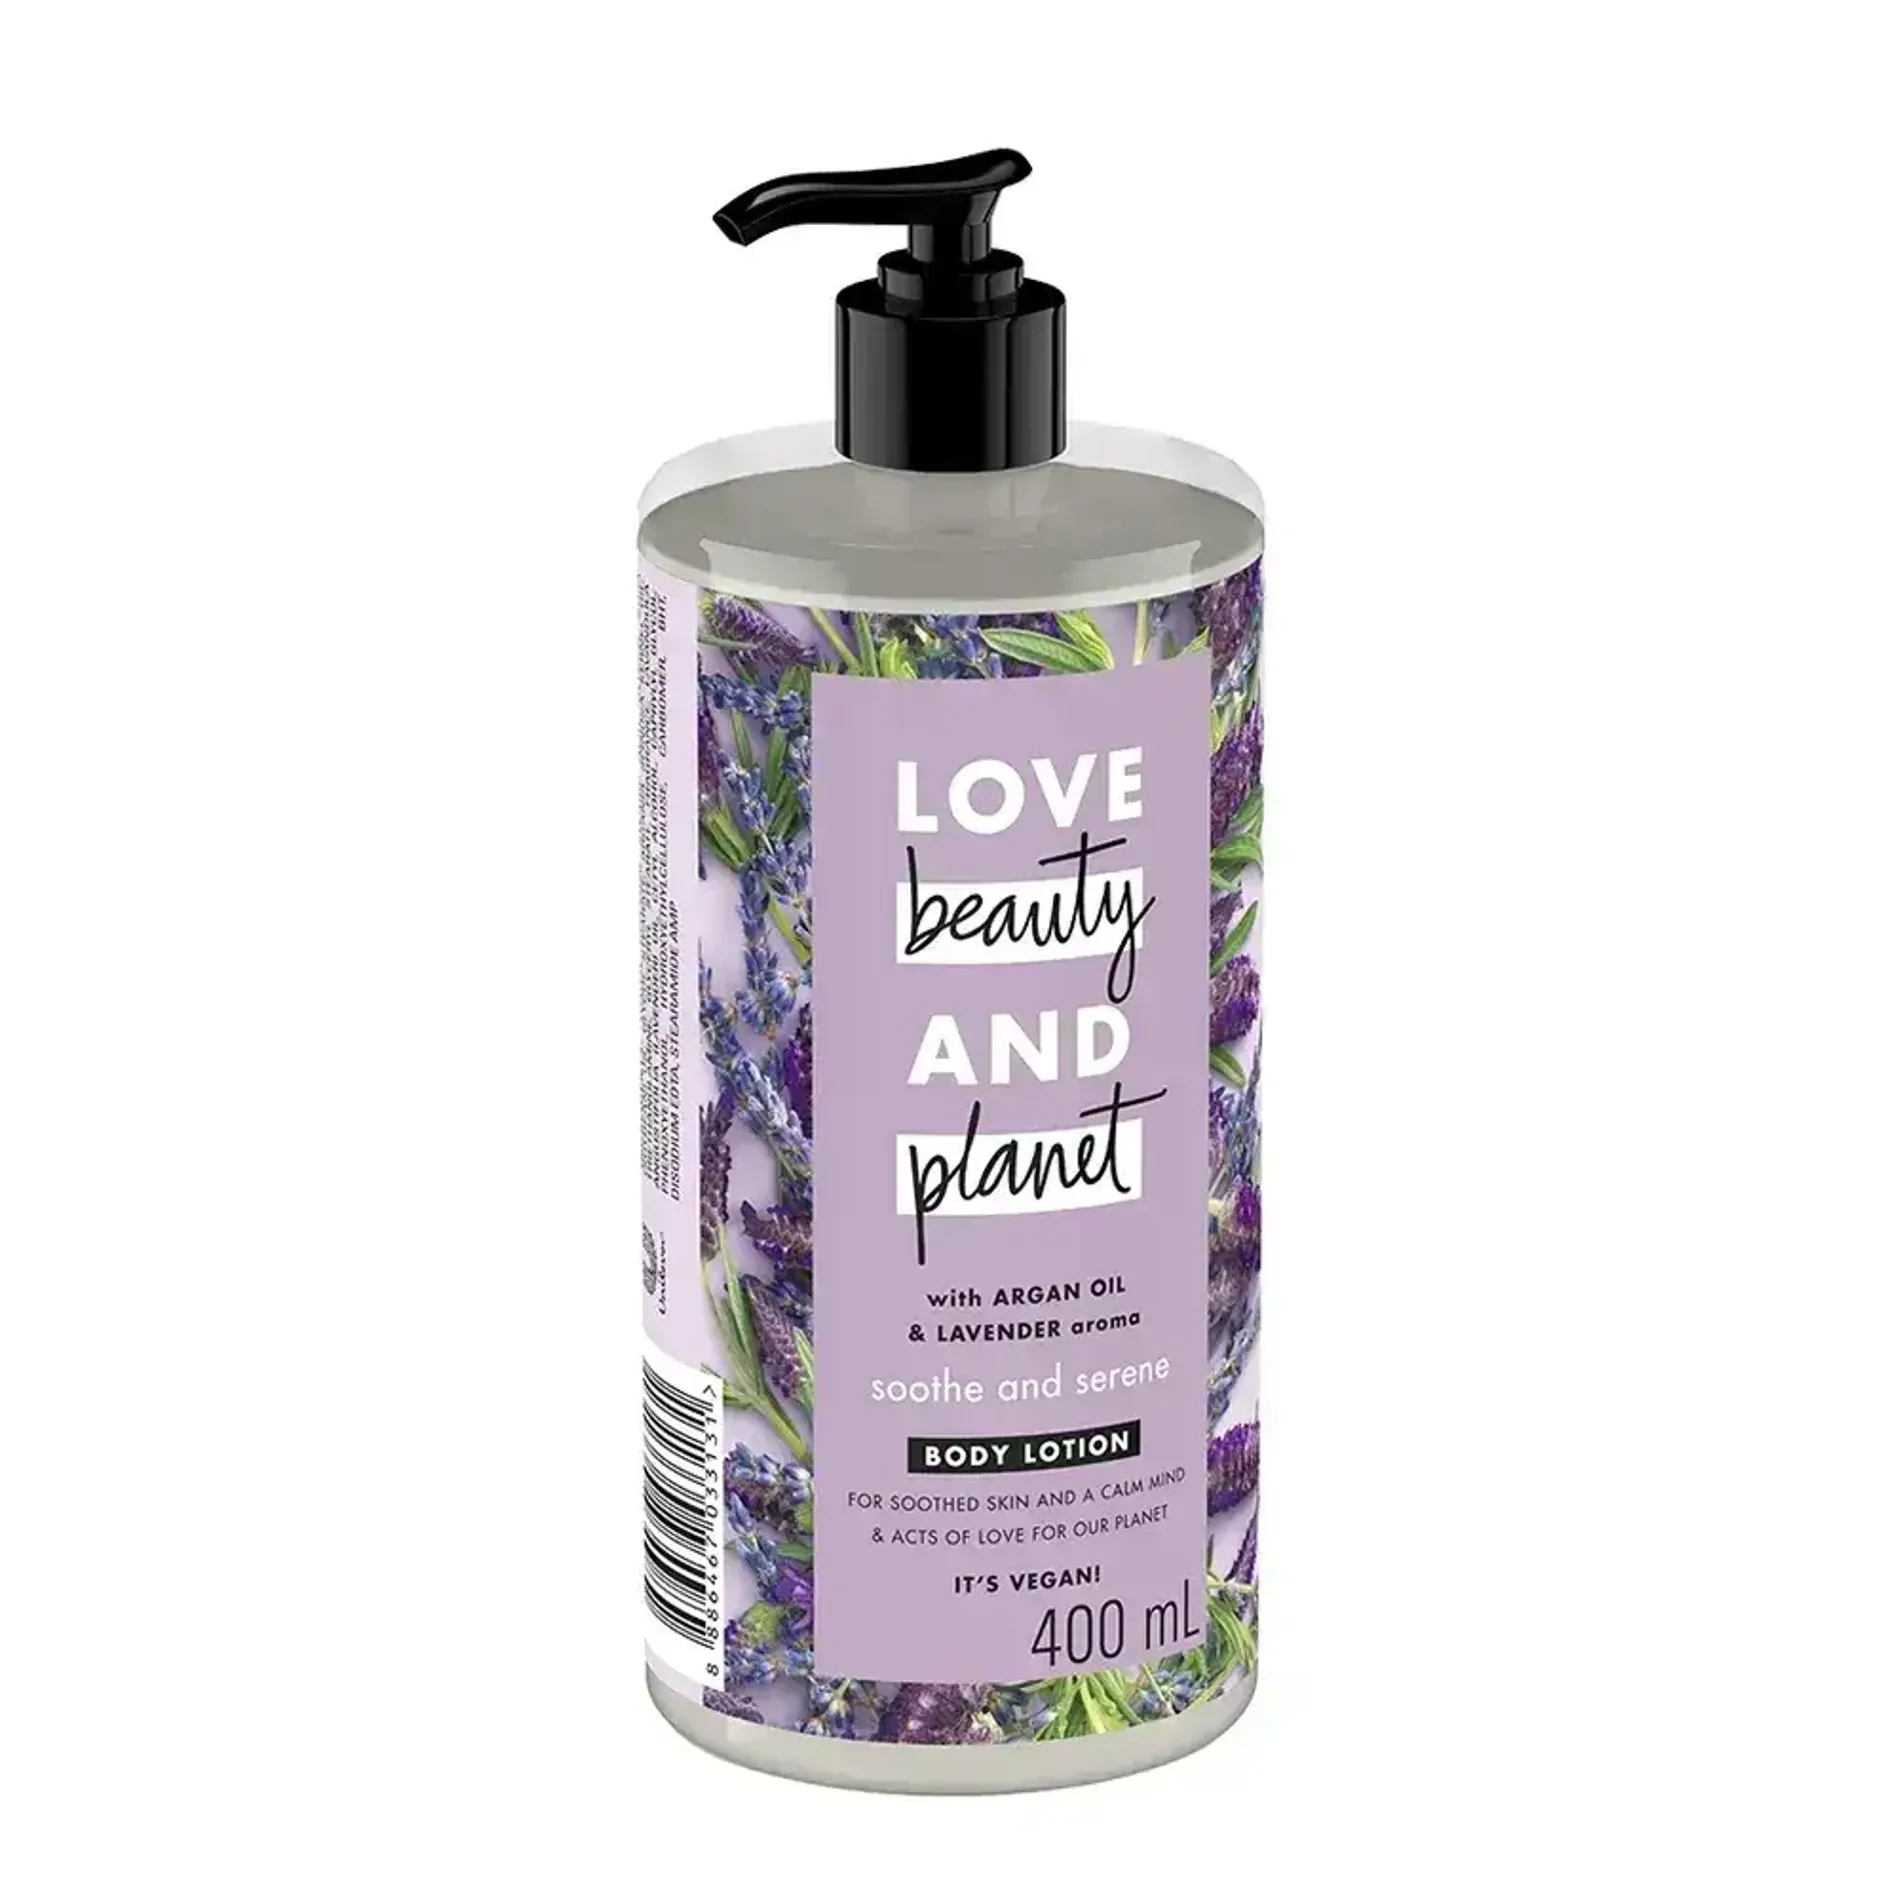 sua-duong-the-diu-nhe-love-beauty-planet-soothe-and-serene-body-lotion-400ml-1